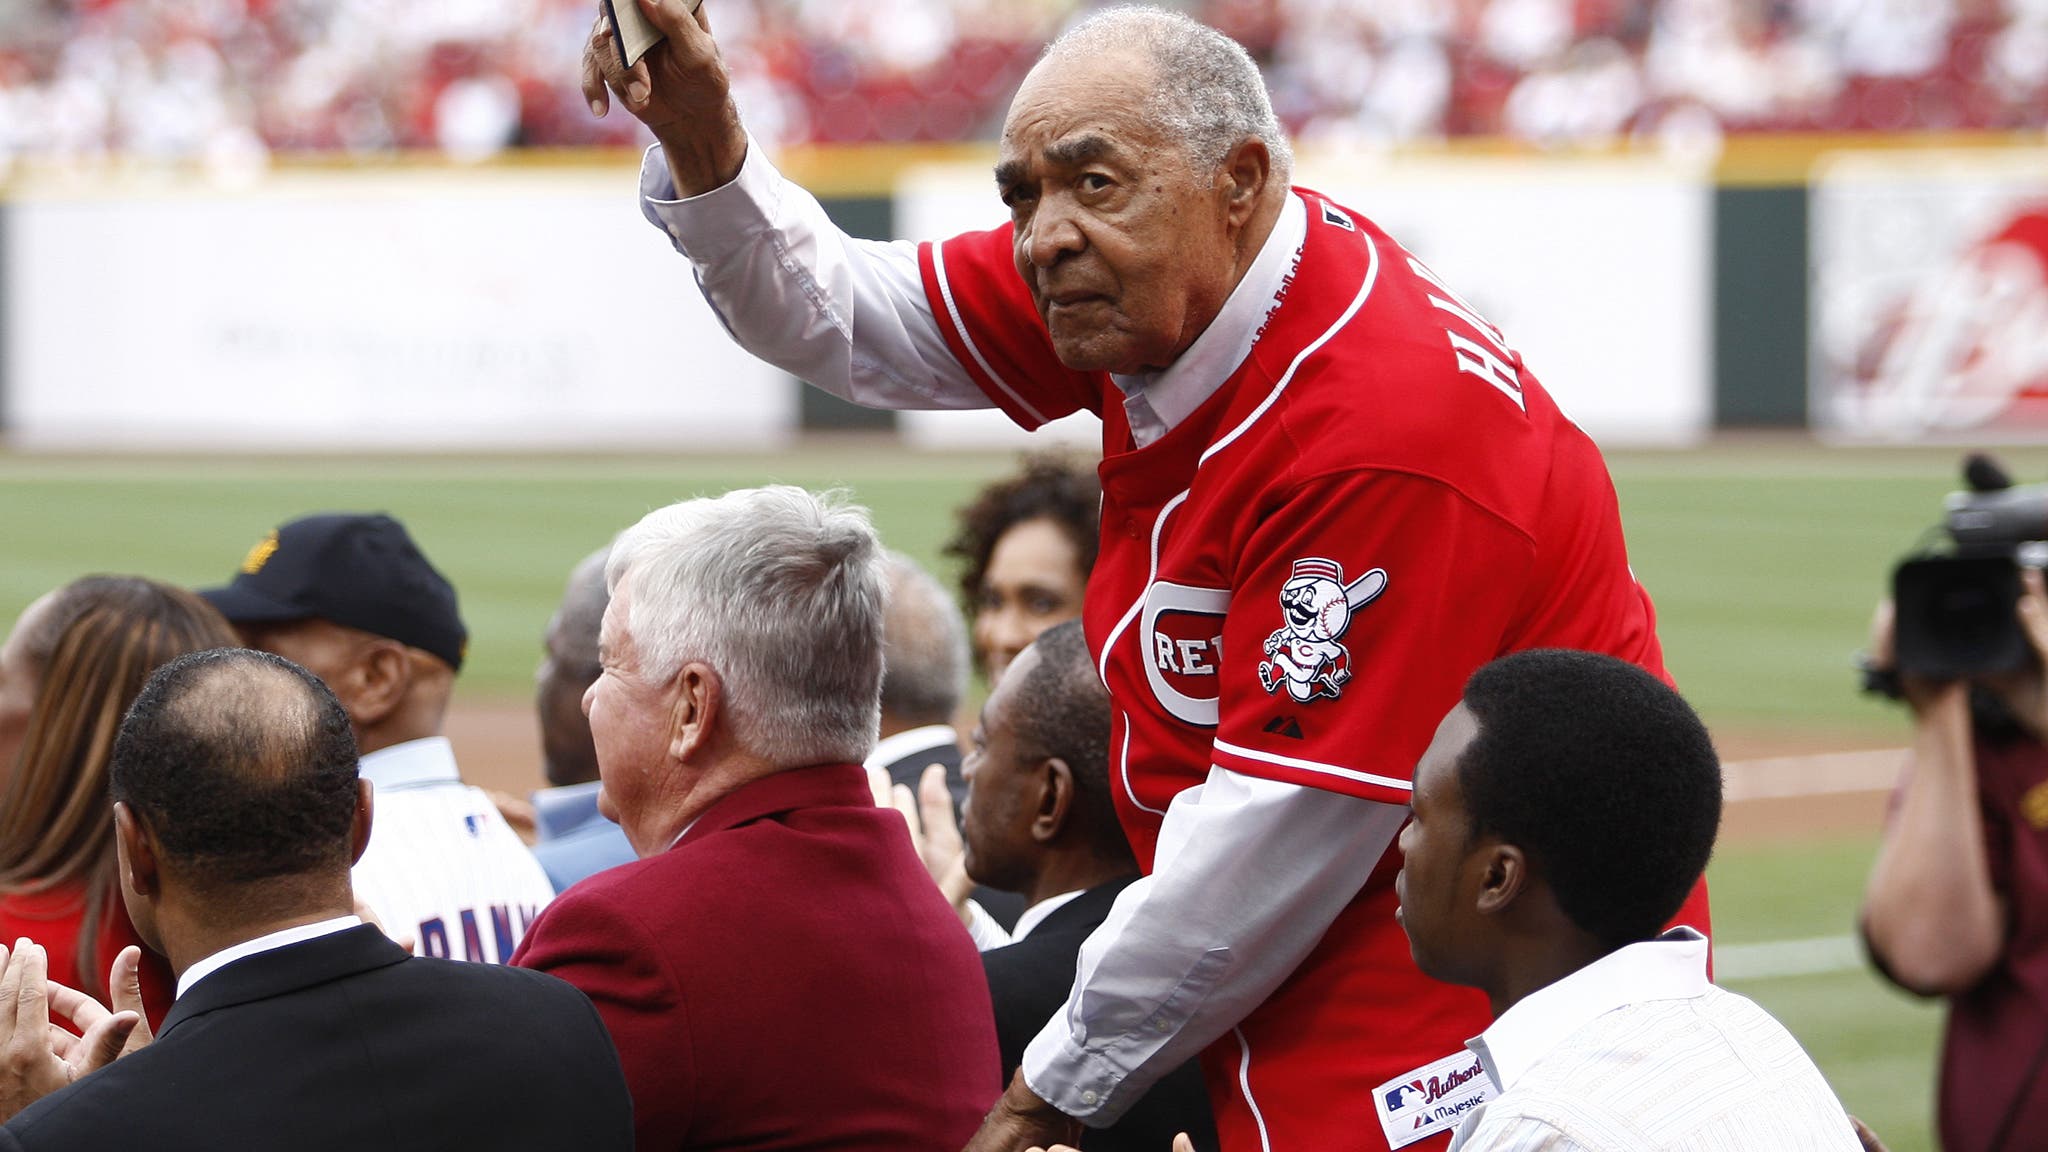 Former Cincinnati Reds player Chuck Harmon at the 2010 Civil Rights Game